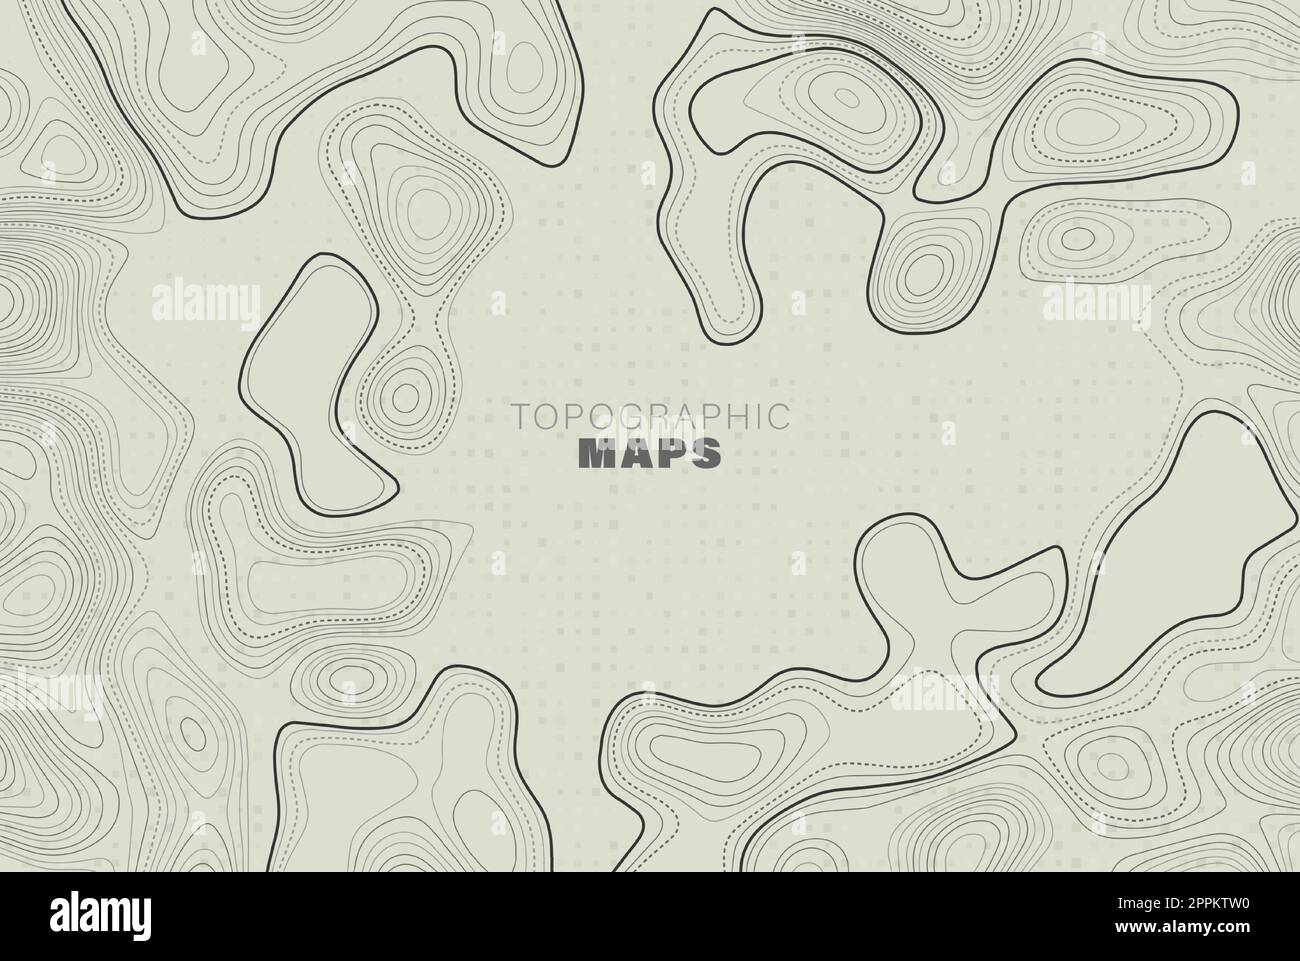 Contour topographic map abstract vector background. Linear topographic map, vector. Stock Vector